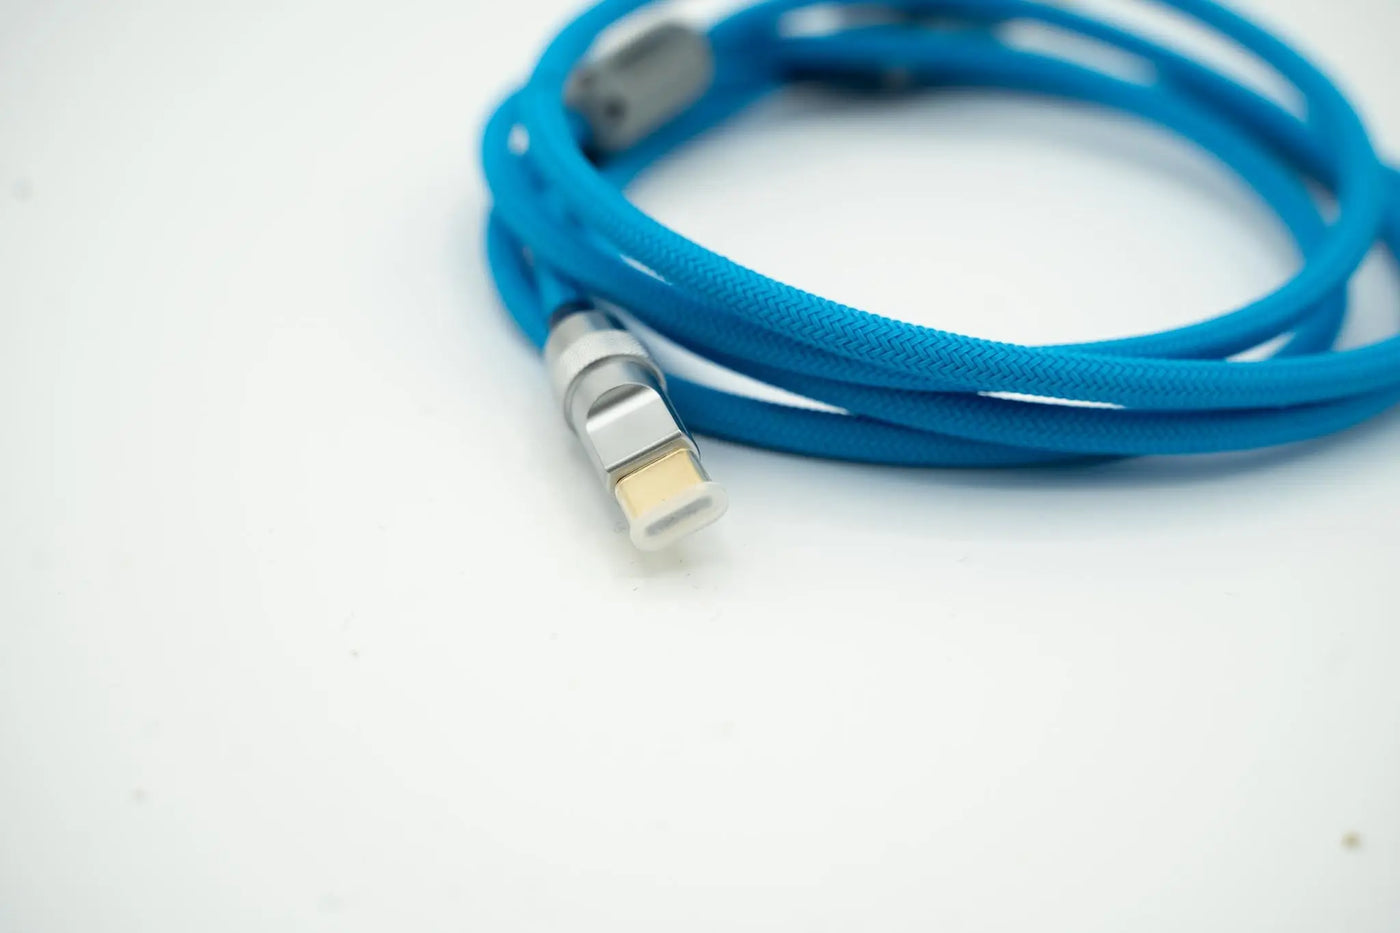 Blue Straight Cables Type C USB for Keyboard Vyral